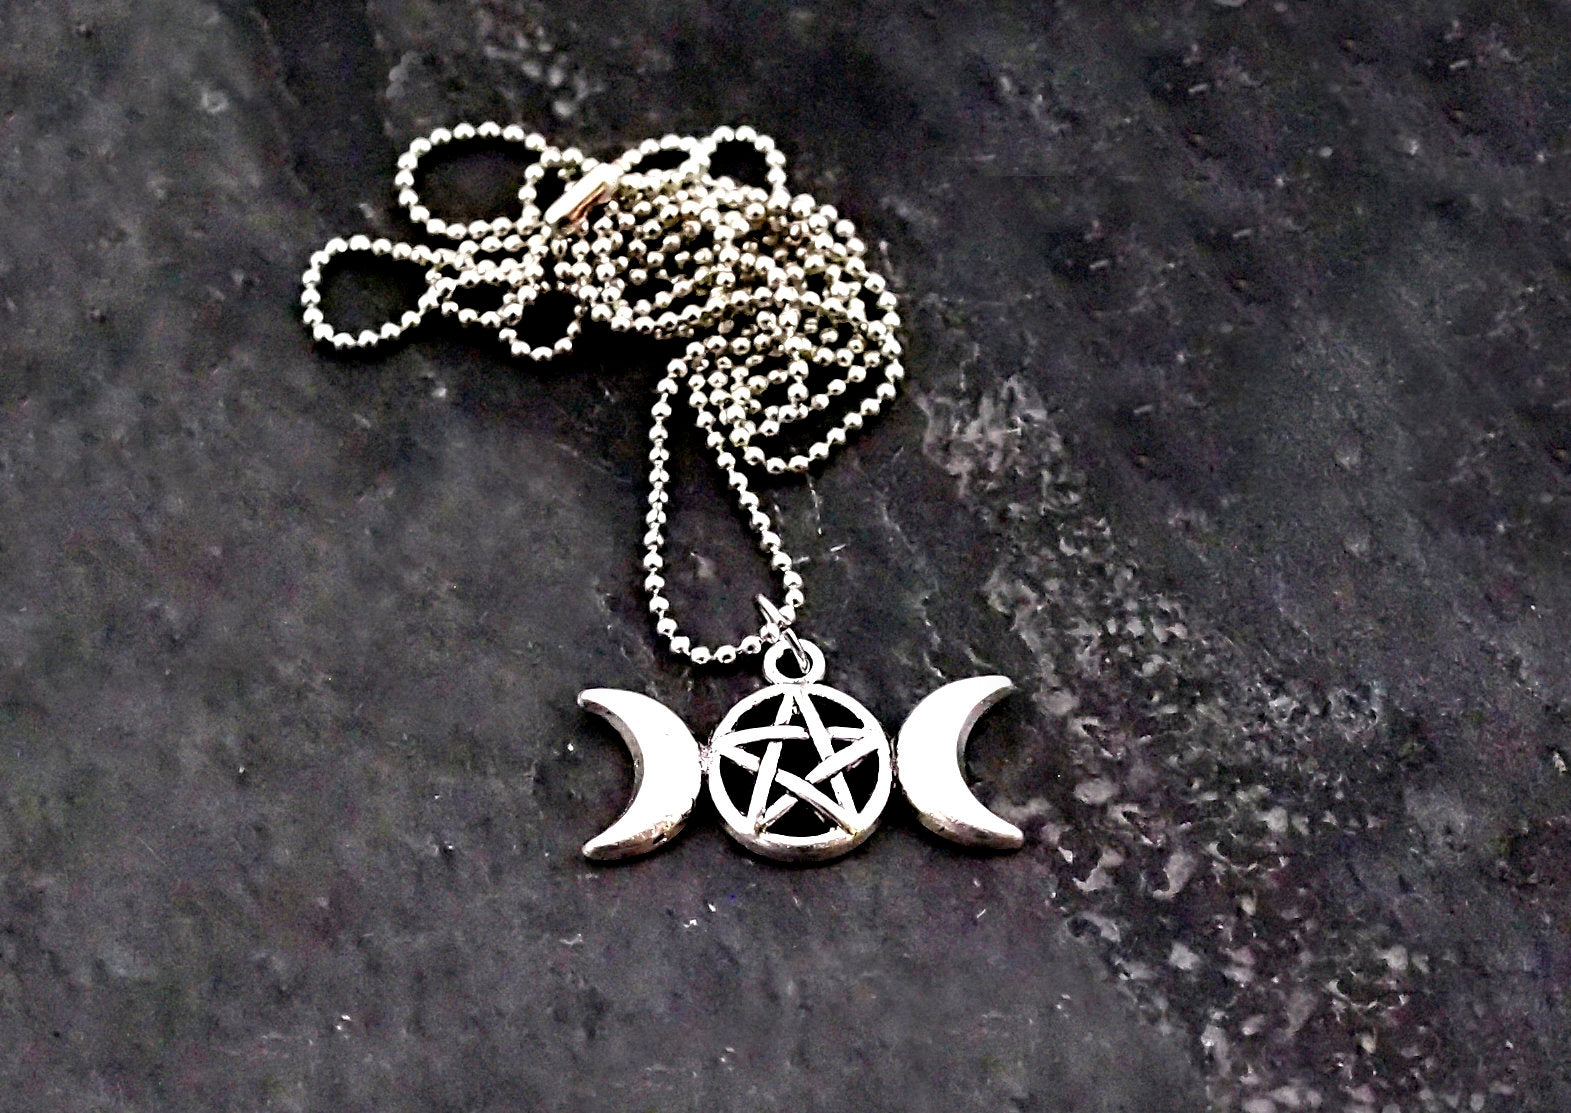 A close up image of the triple goddess pentagram necklace from Uncorked & Bottled Up